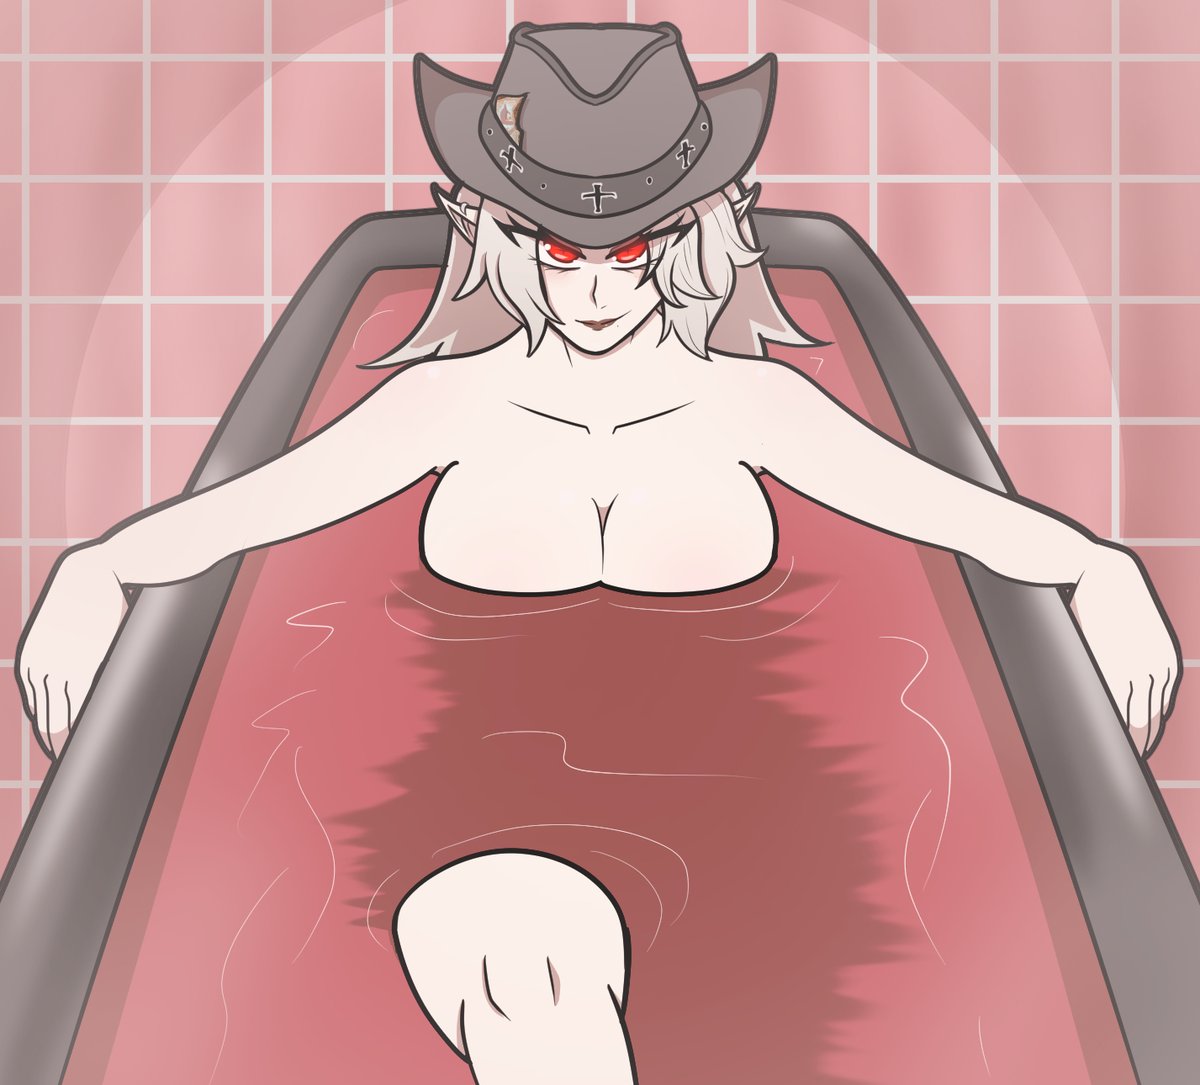 good day to relax and take a blood bath

#ValentinesBounty #Vtubers #VtubersEN